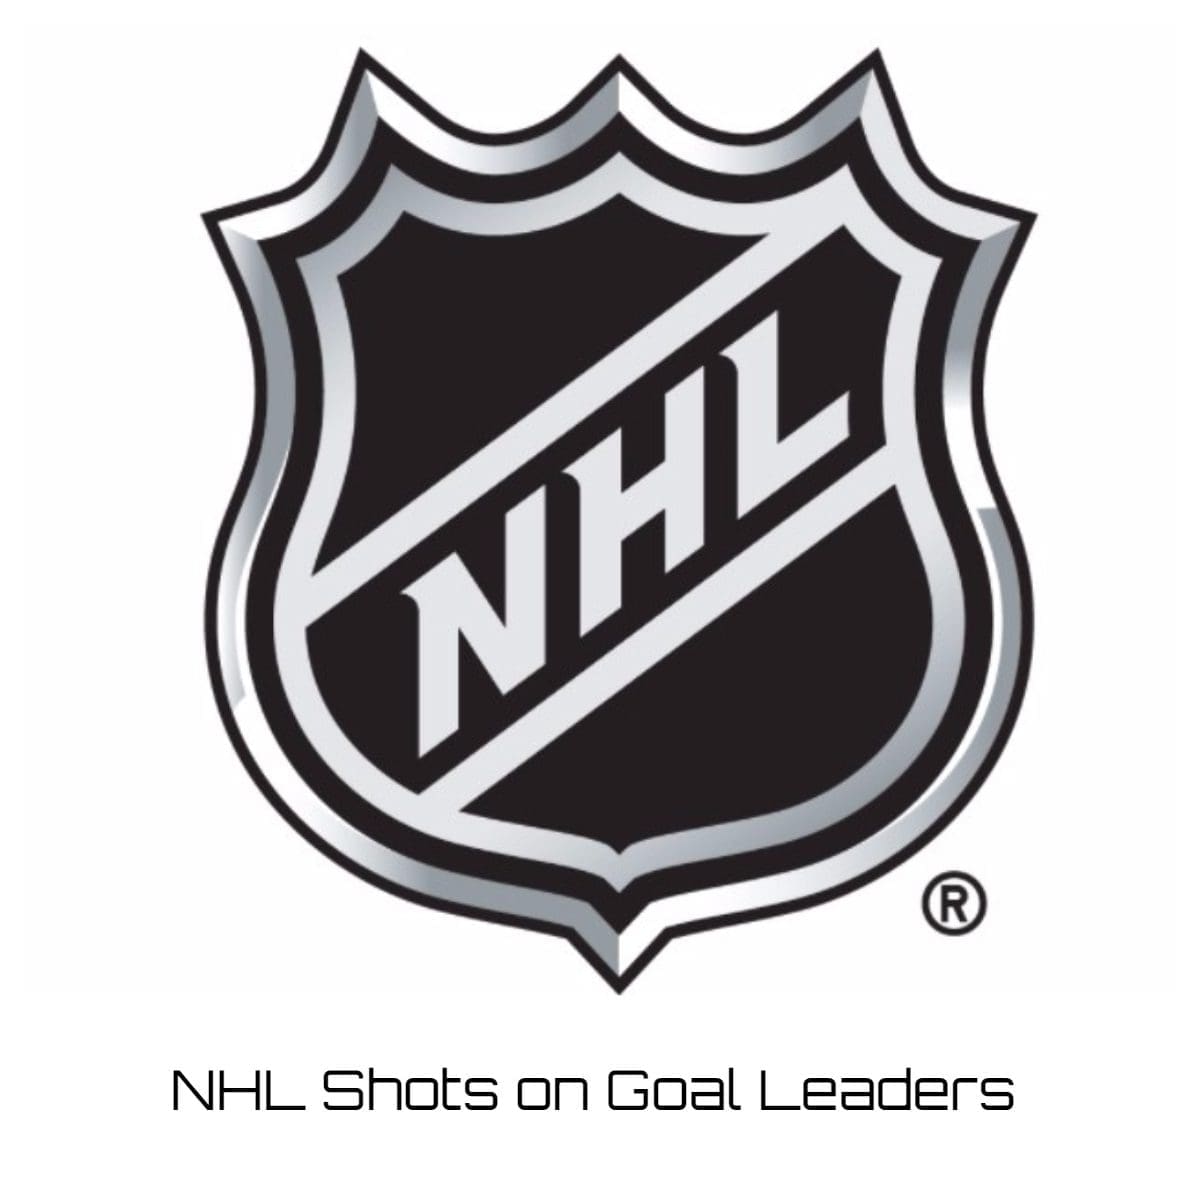 NHL Shots on Goal Leaders 202324? Player Rankings